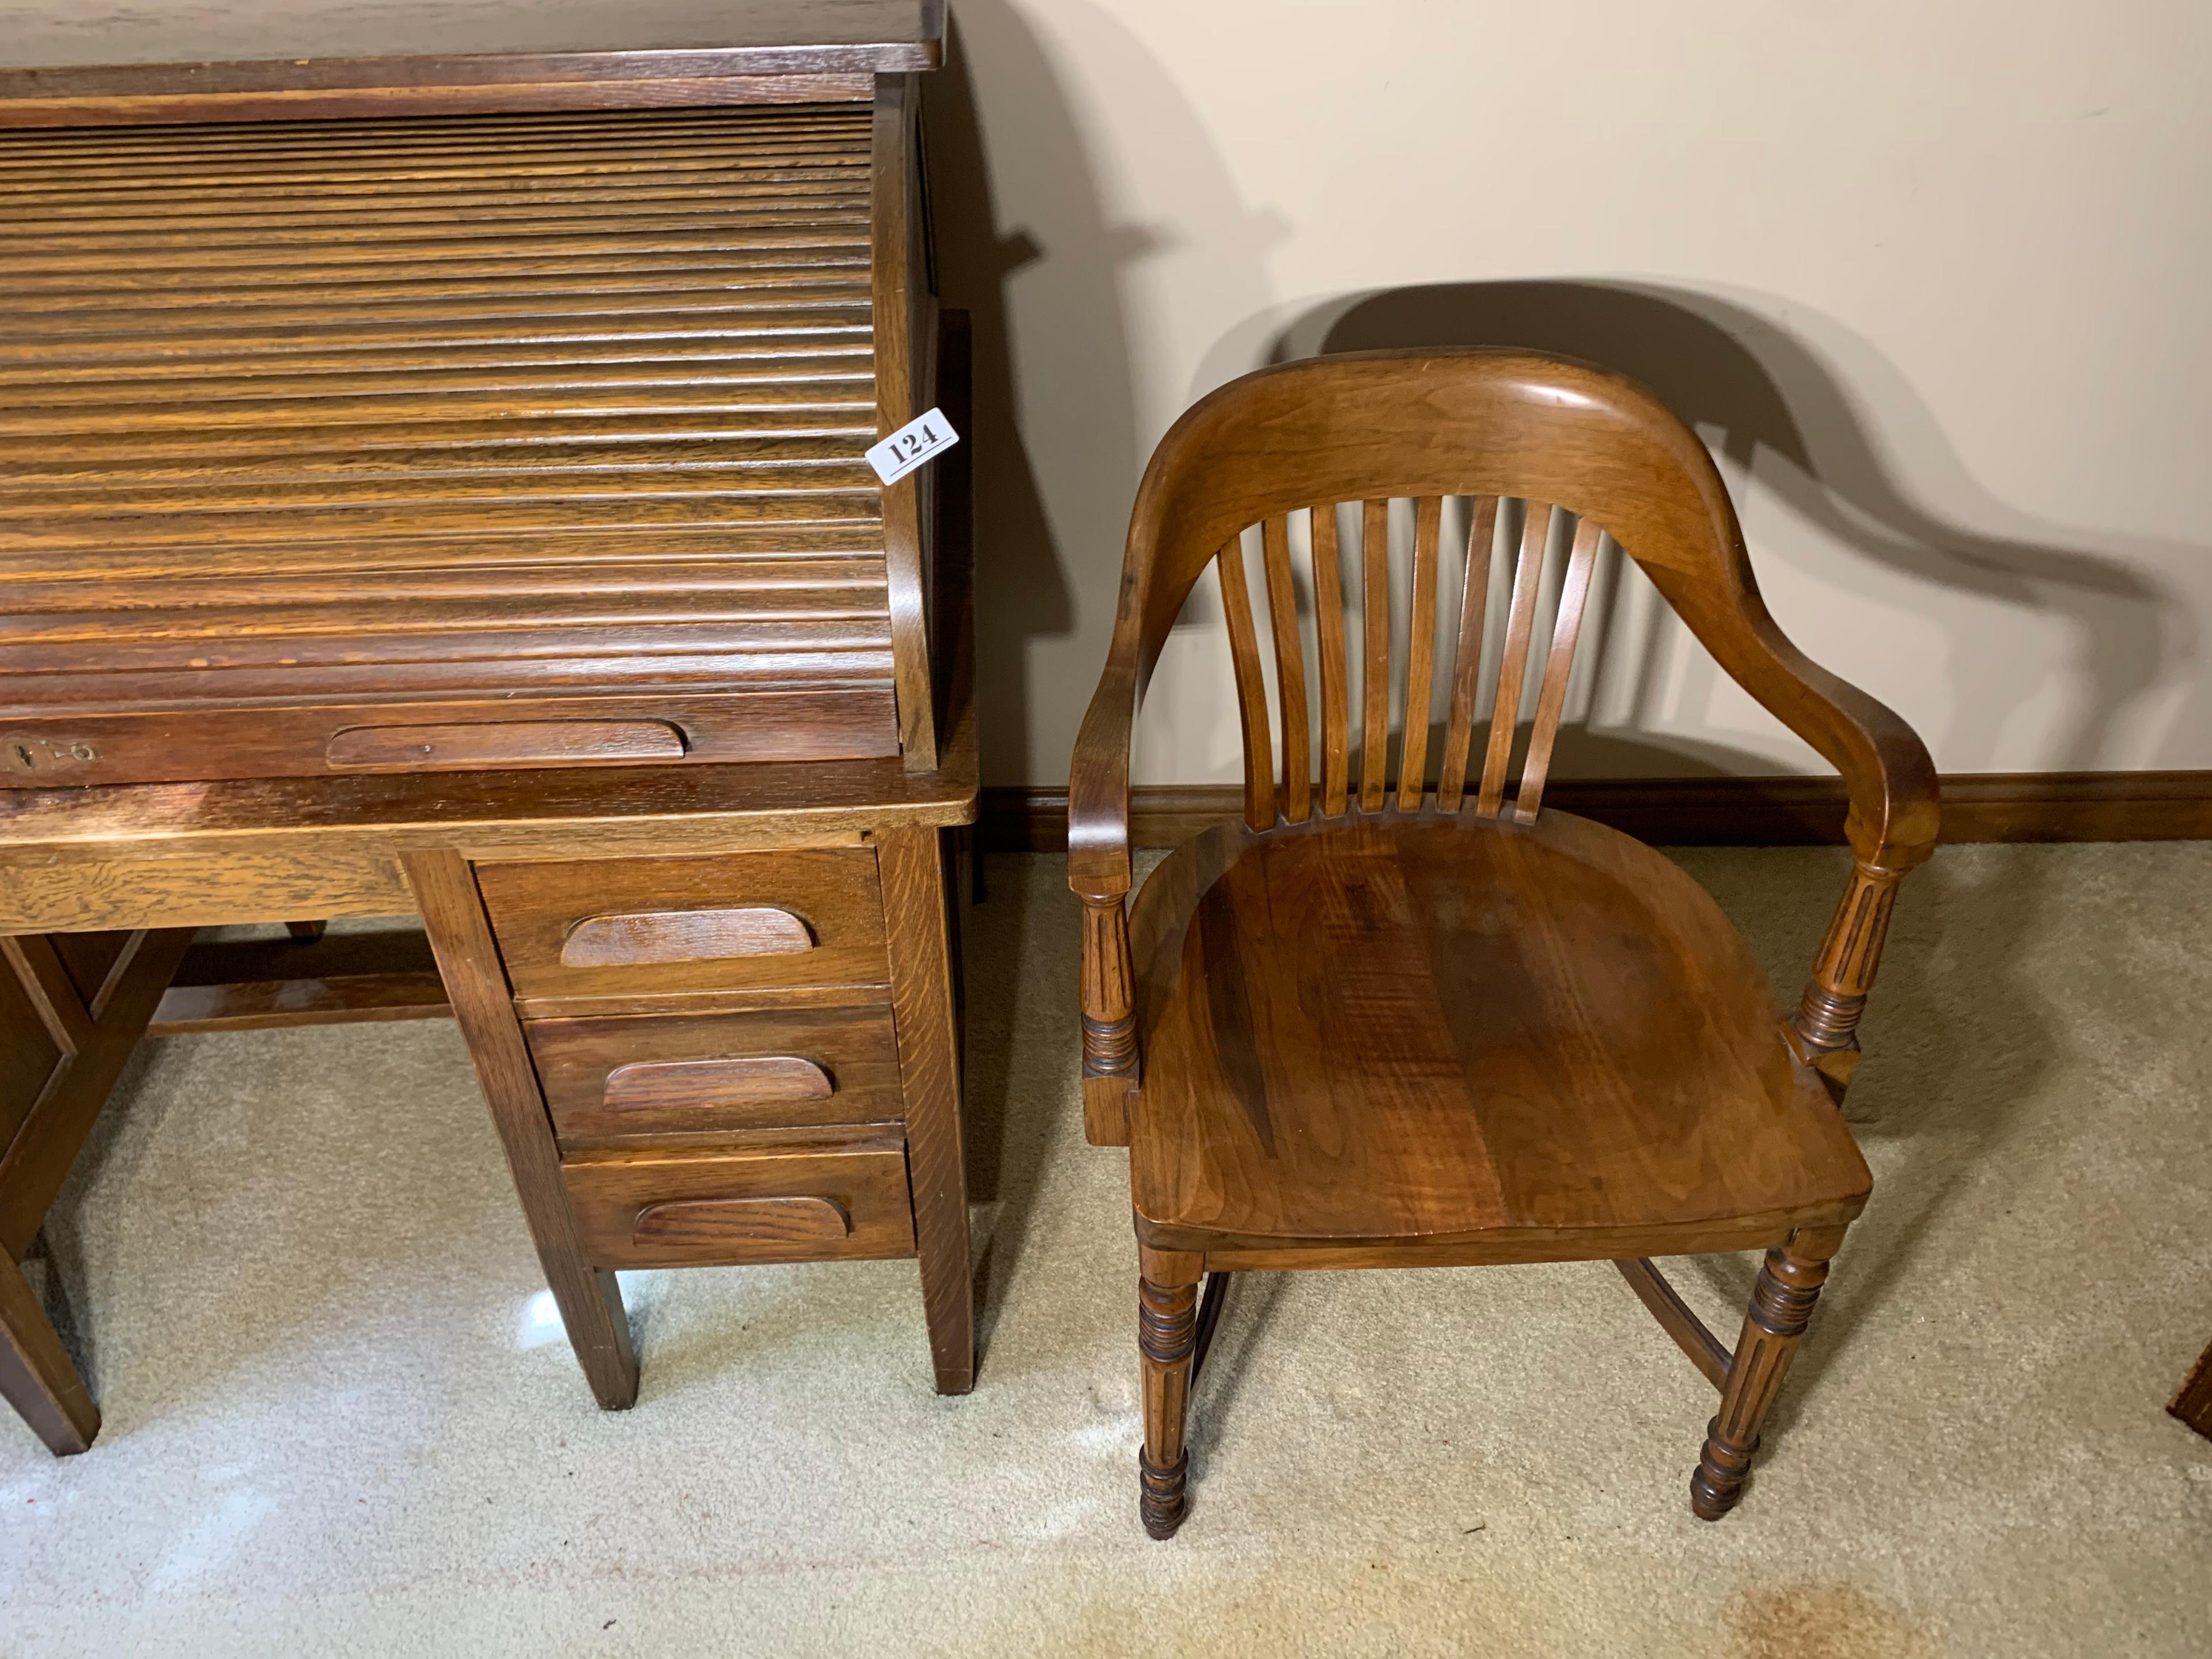 Vintage roll top desk and chair